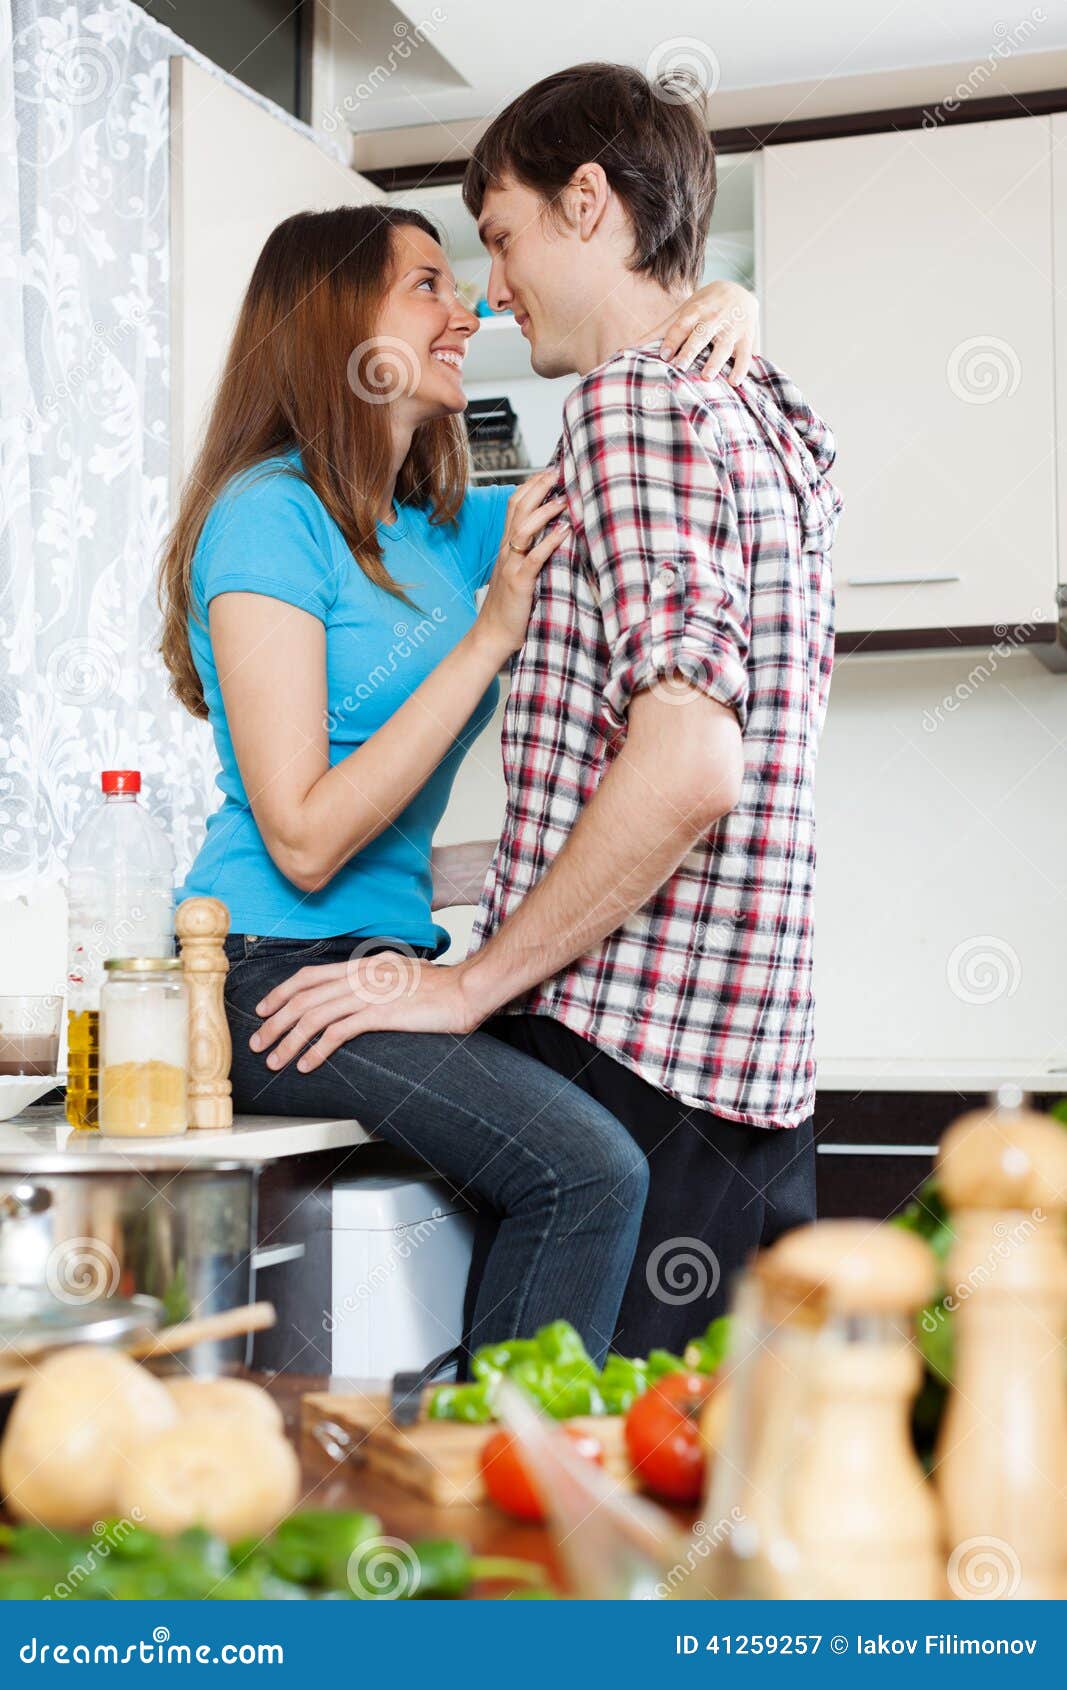 Couple Having Sex at Domestic Kitchen Stock Image photo picture